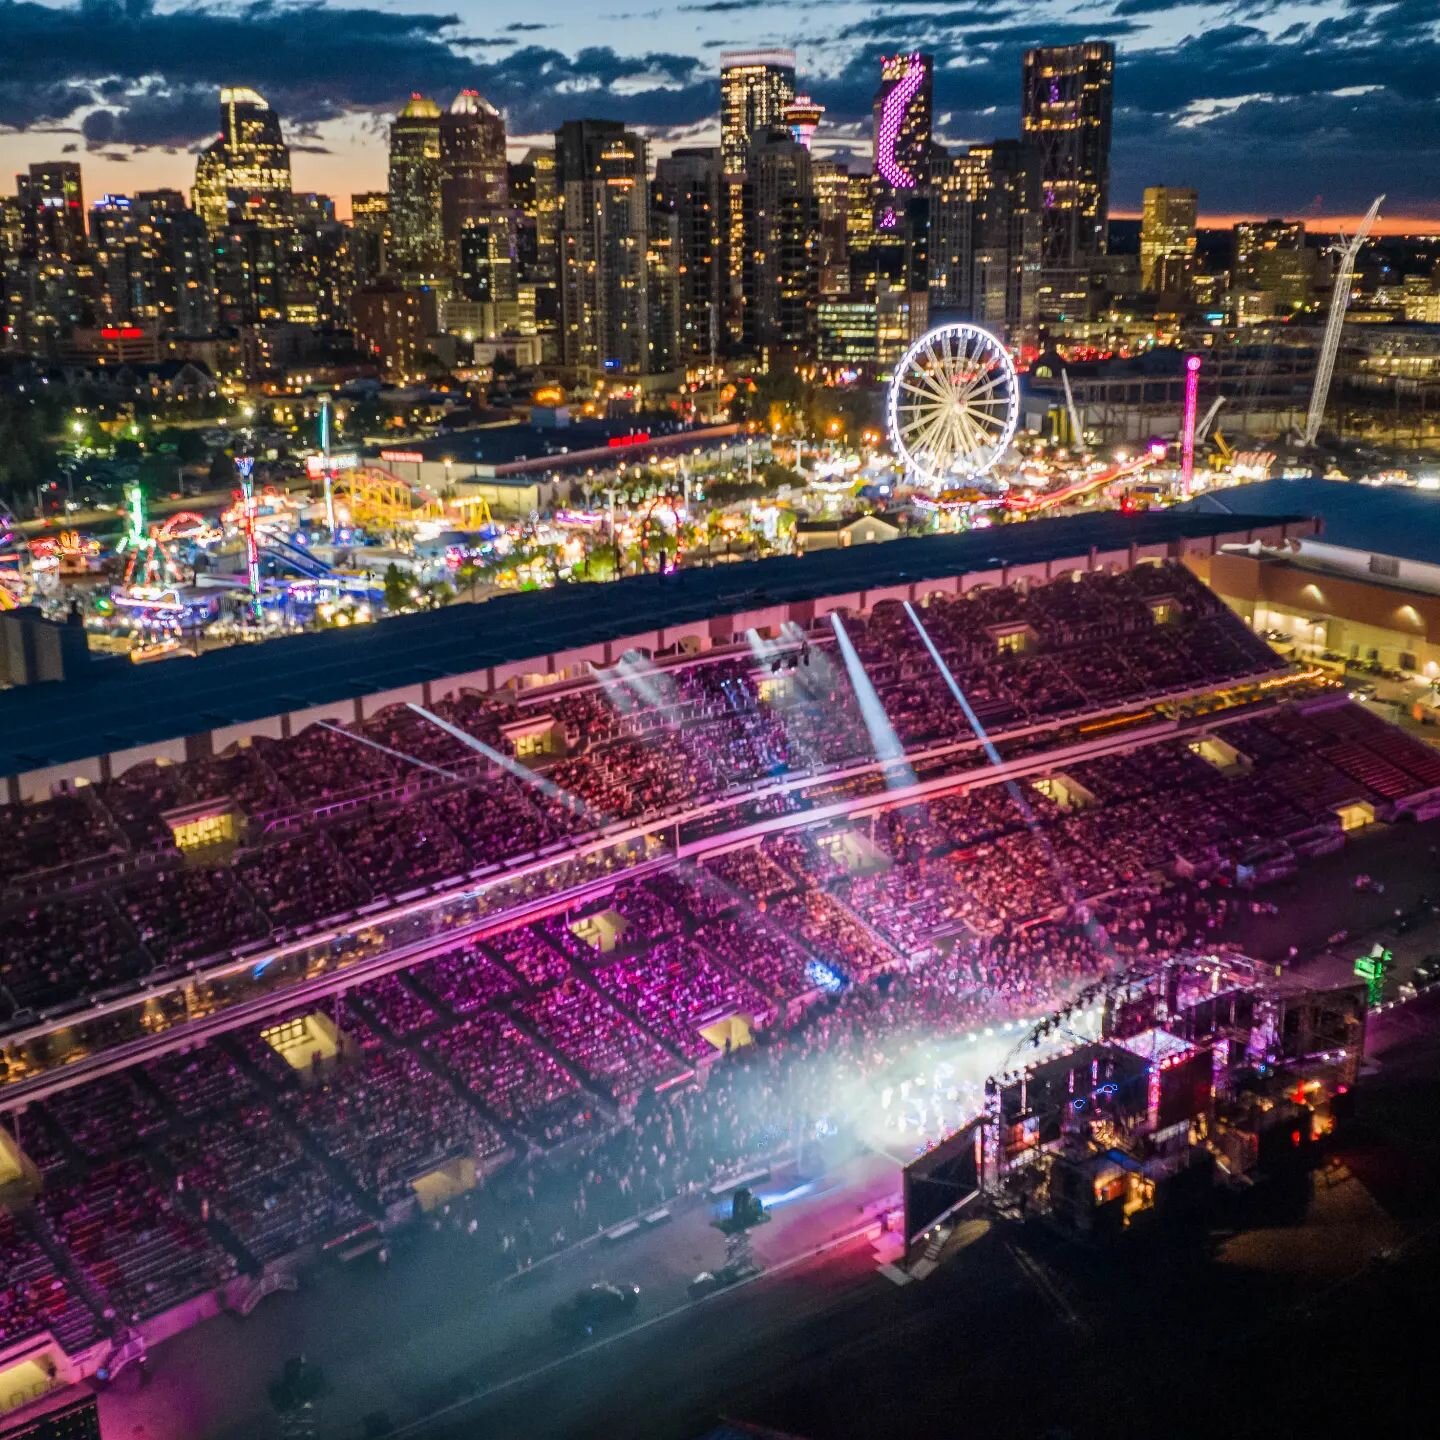 Great kickoff to the show Friday night. Haven't seen crowds like this in years!! Live streaming this incredible backdrop with my drones all week, come on down and see the Grandstand show! 
#stampede2022 #dronephotography #communityspirit  #travelalbe